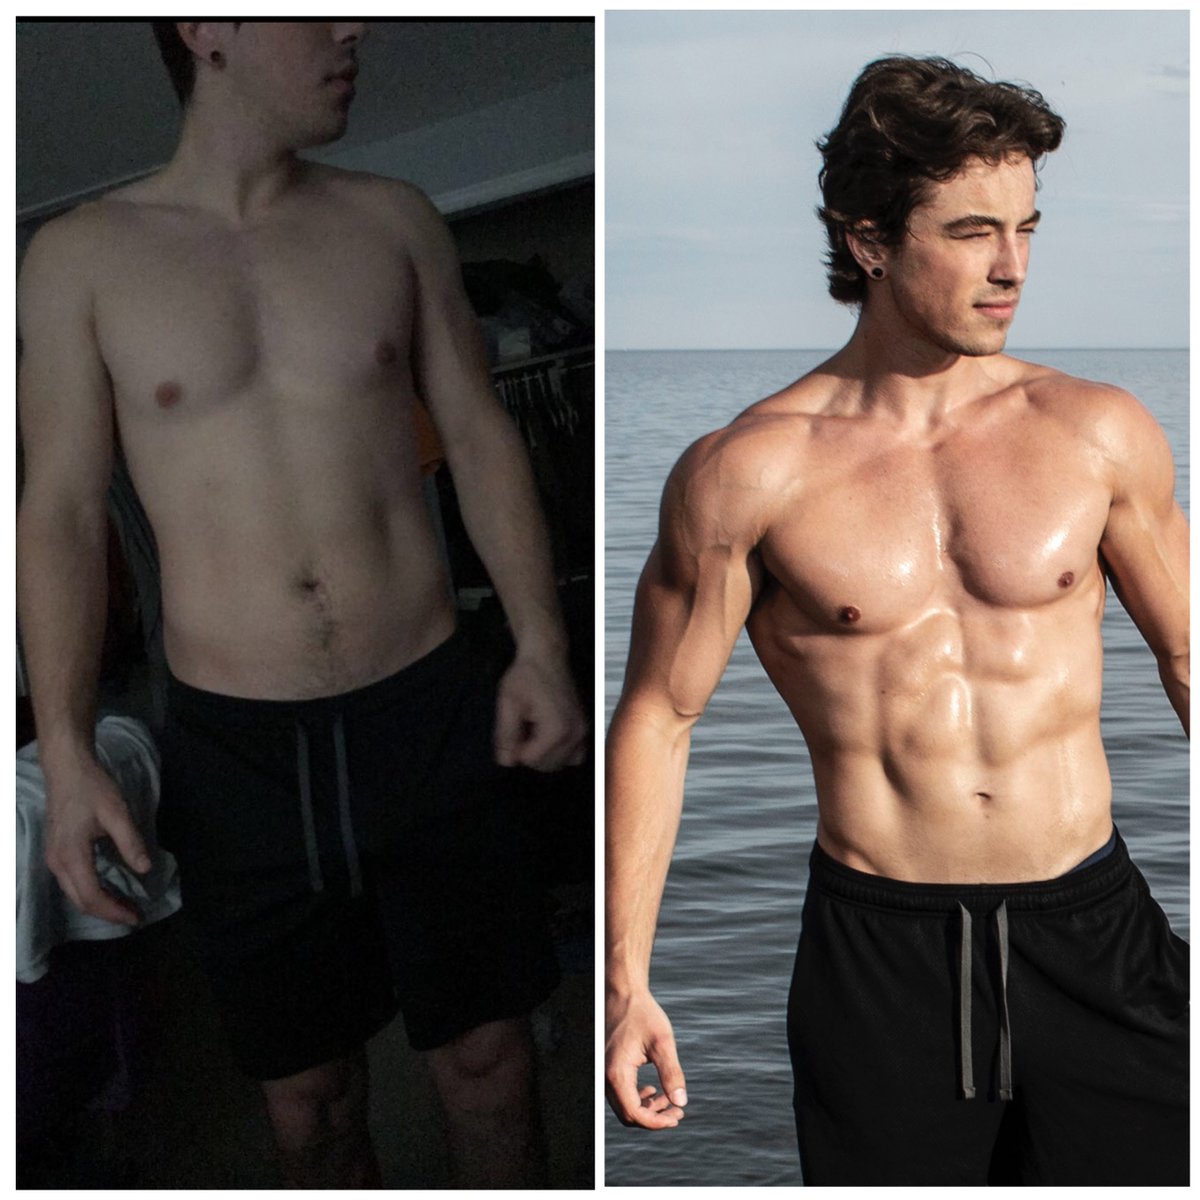 Need a laid out, science-backed plan?Get our Hollywood Physique Program+ No Gym Alternative for freeNo charge until July 22Just $19Only 8 copies left at this pricePre-order here http://EverfitBrand.com/hollywood 